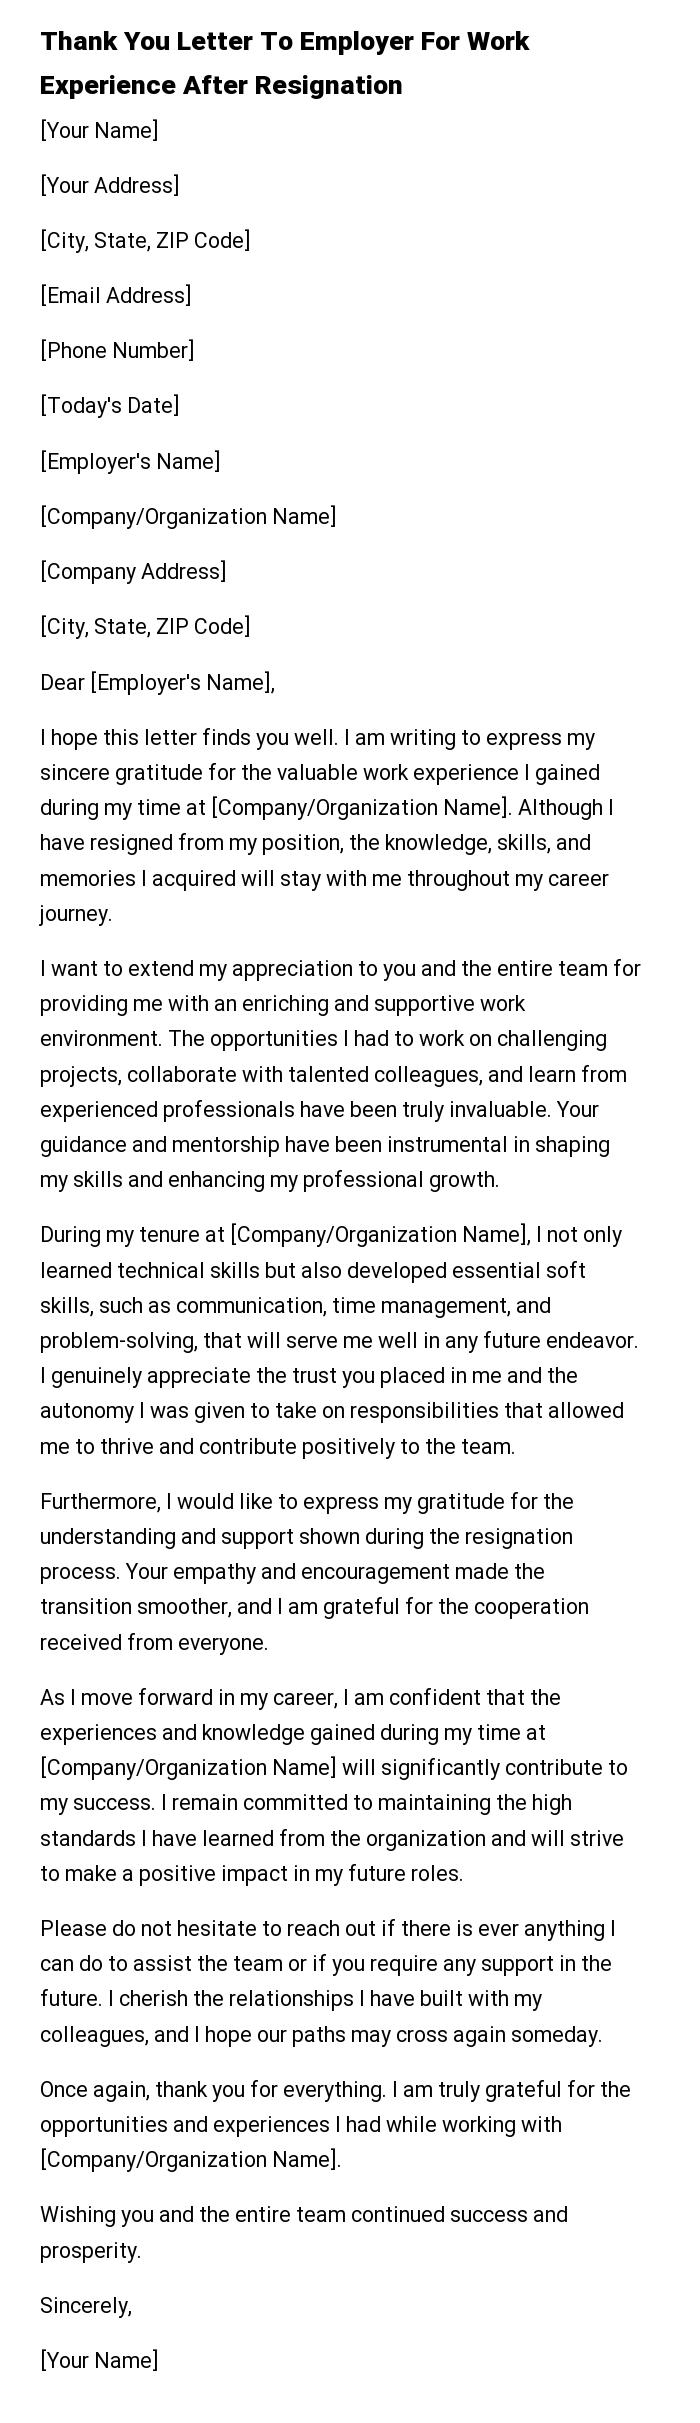 Thank You Letter To Employer For Work Experience After Resignation